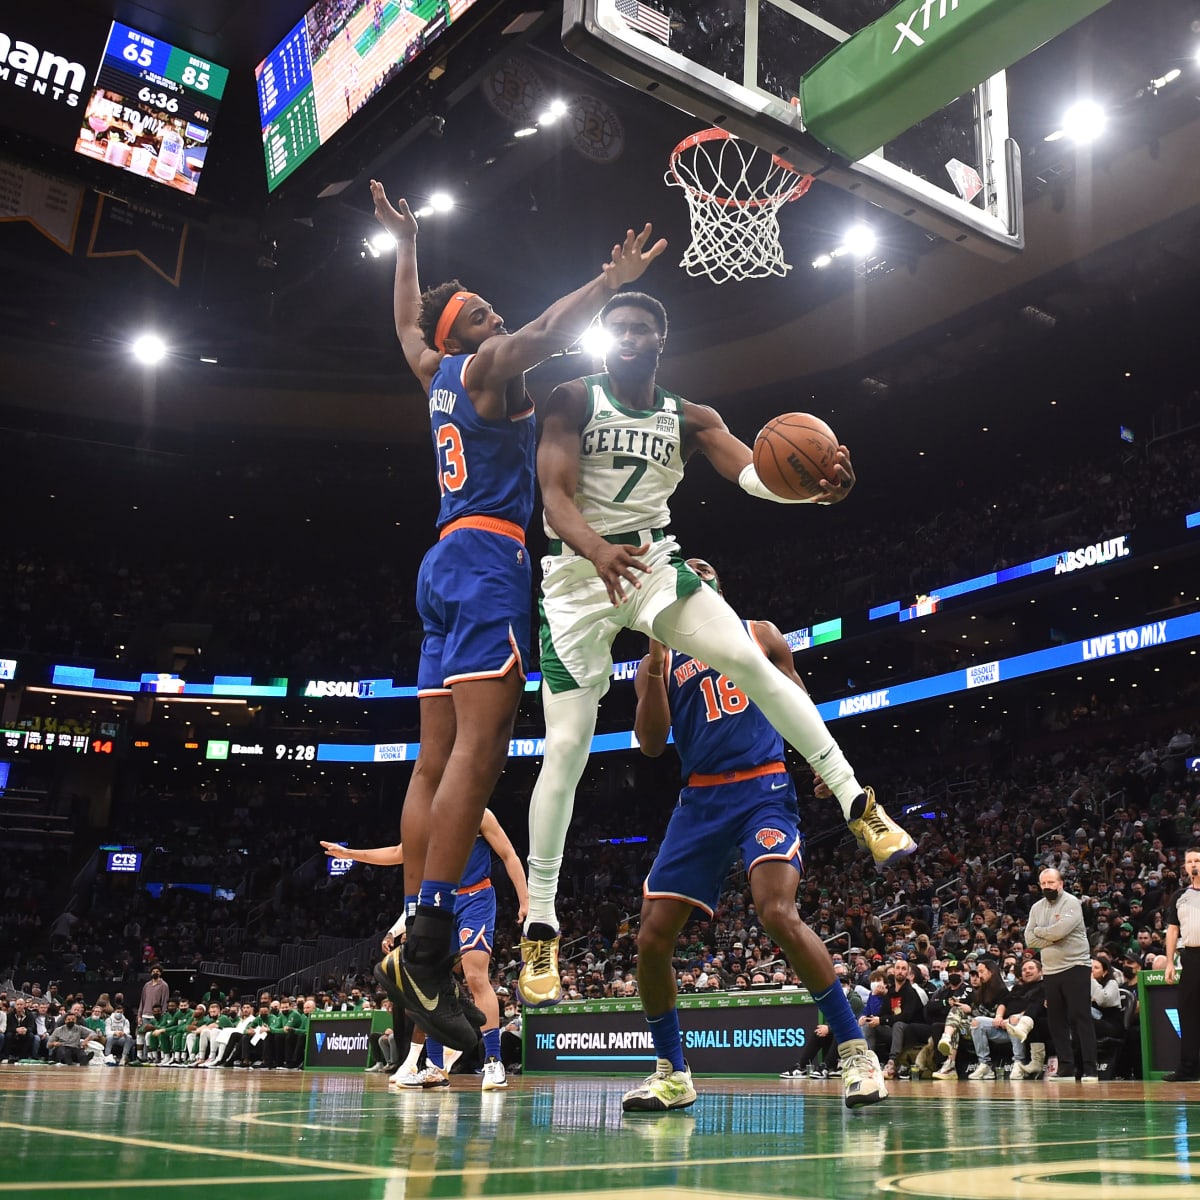 Knicks deliver statement with runaway win over Celtics